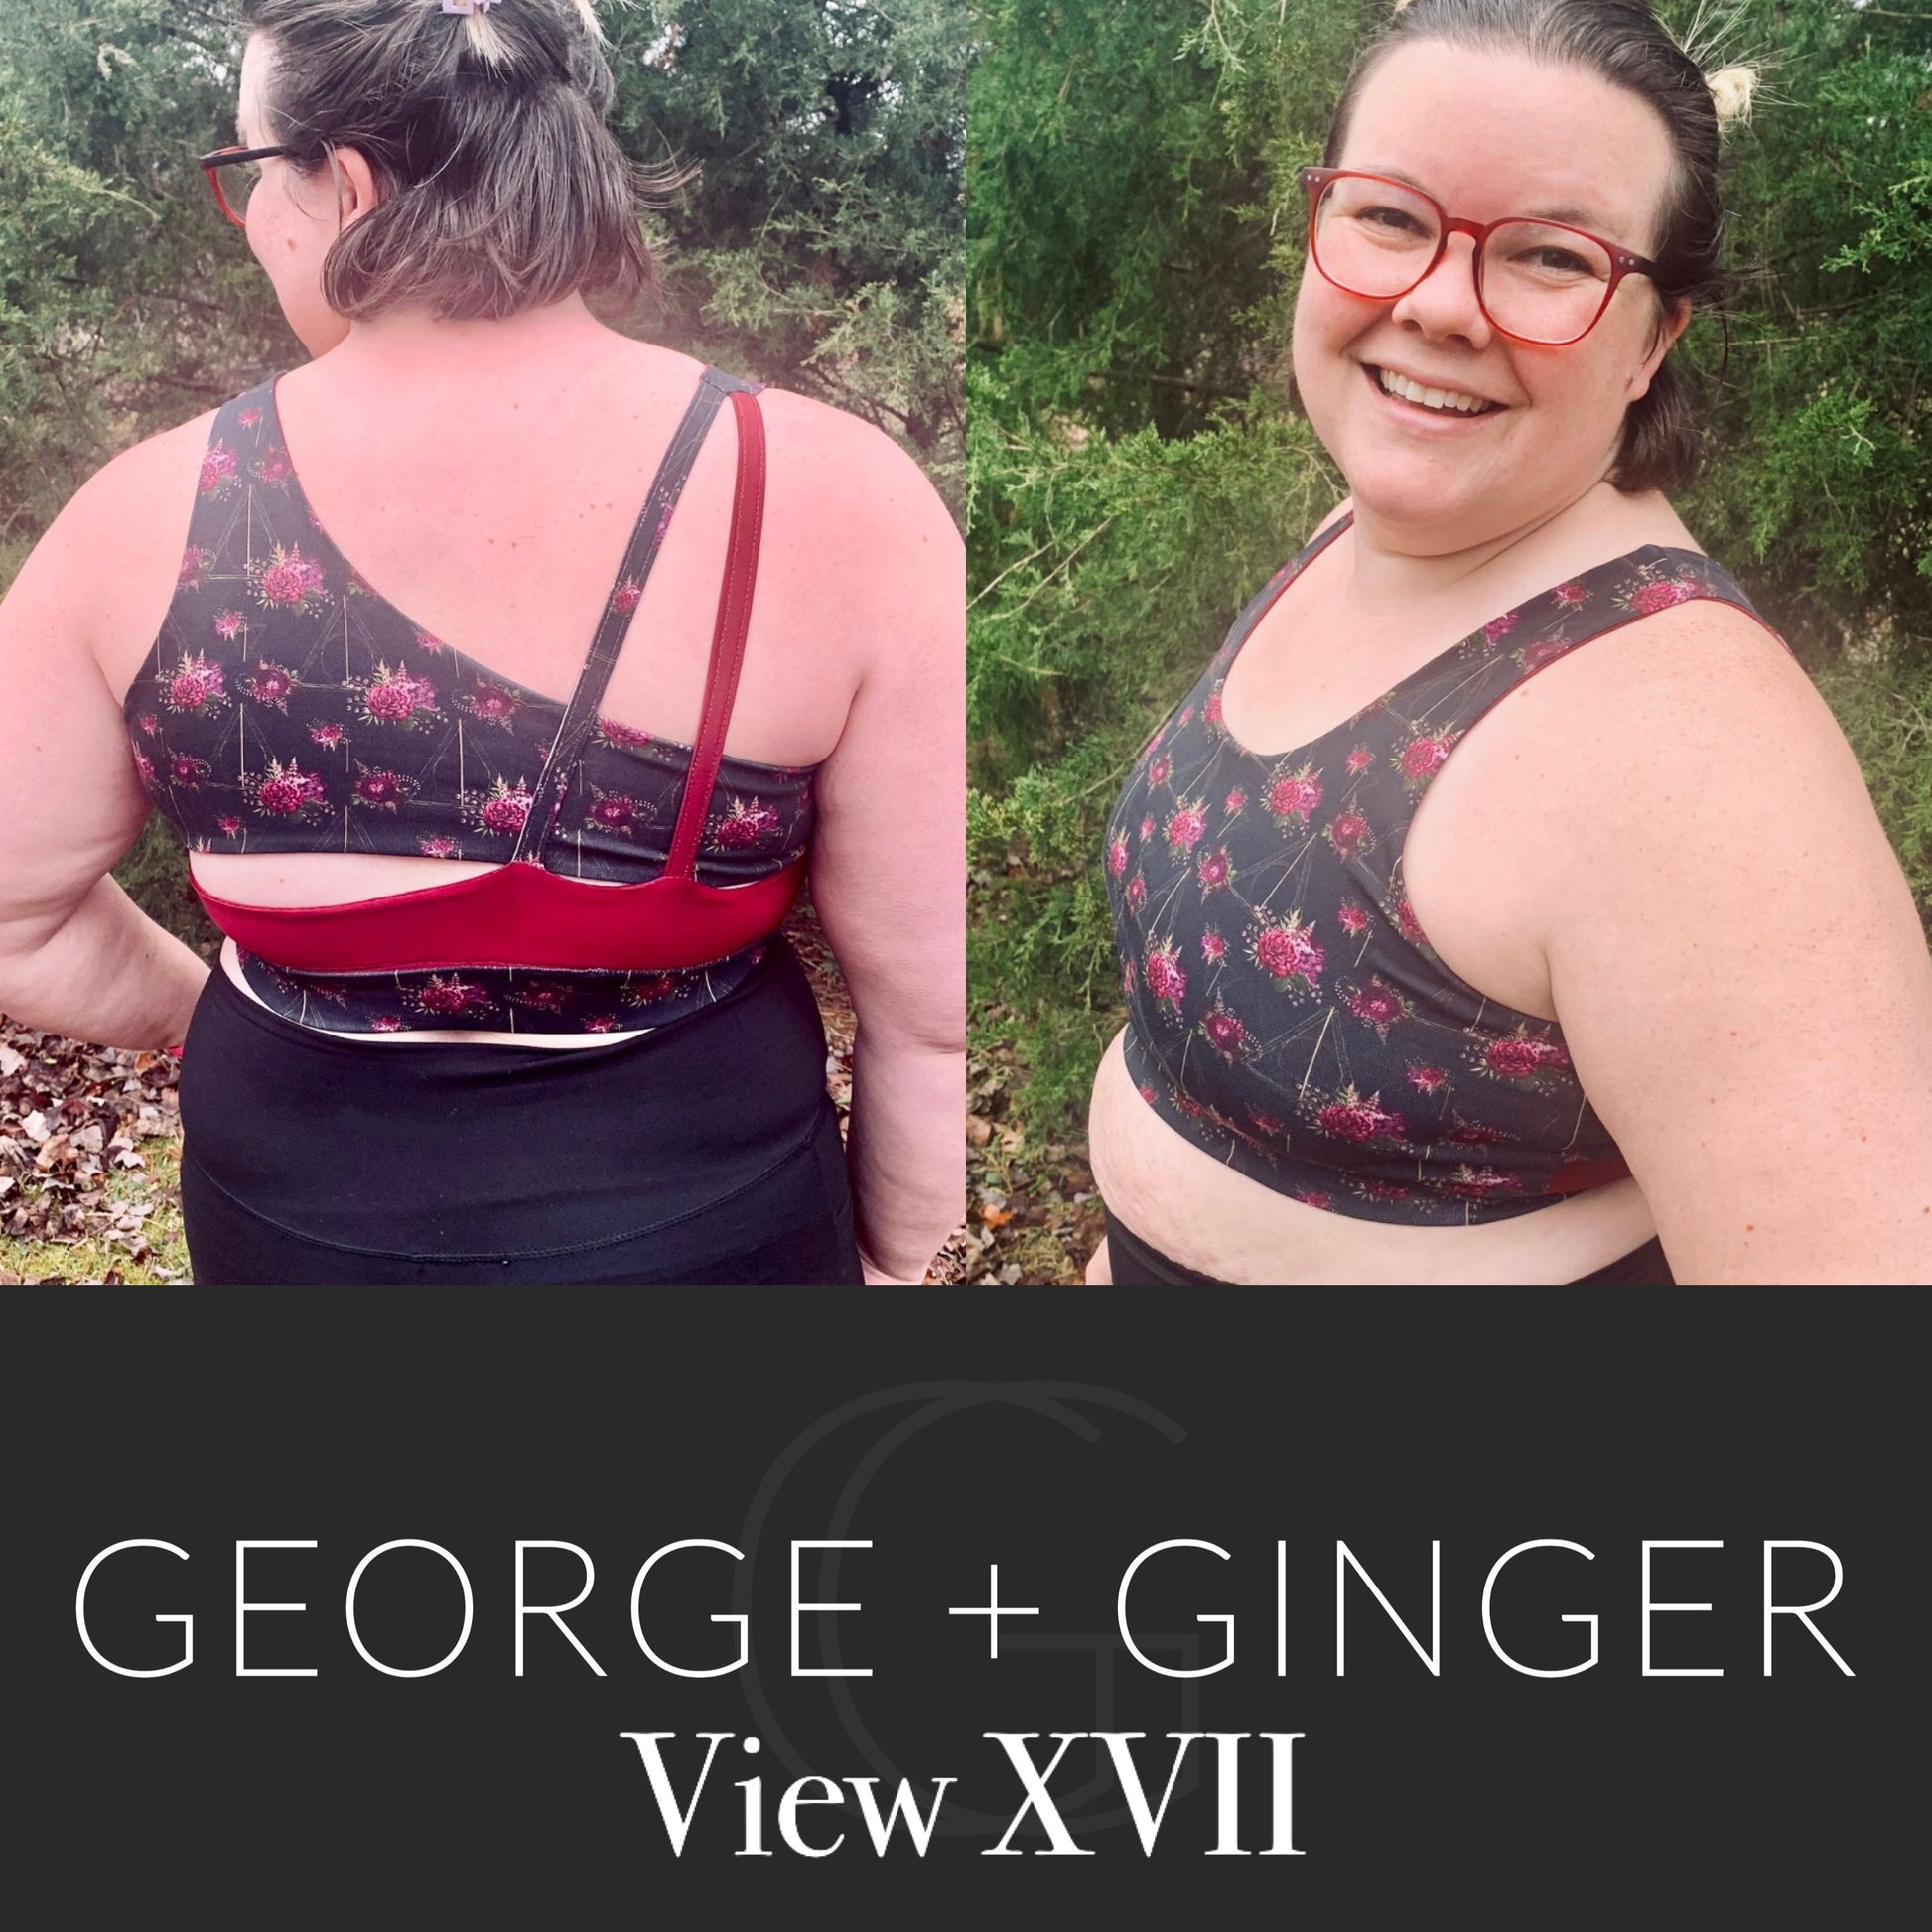 The Change It Up Bra (Back Edition) PDF Sewing Pattern – George And Ginger  Patterns